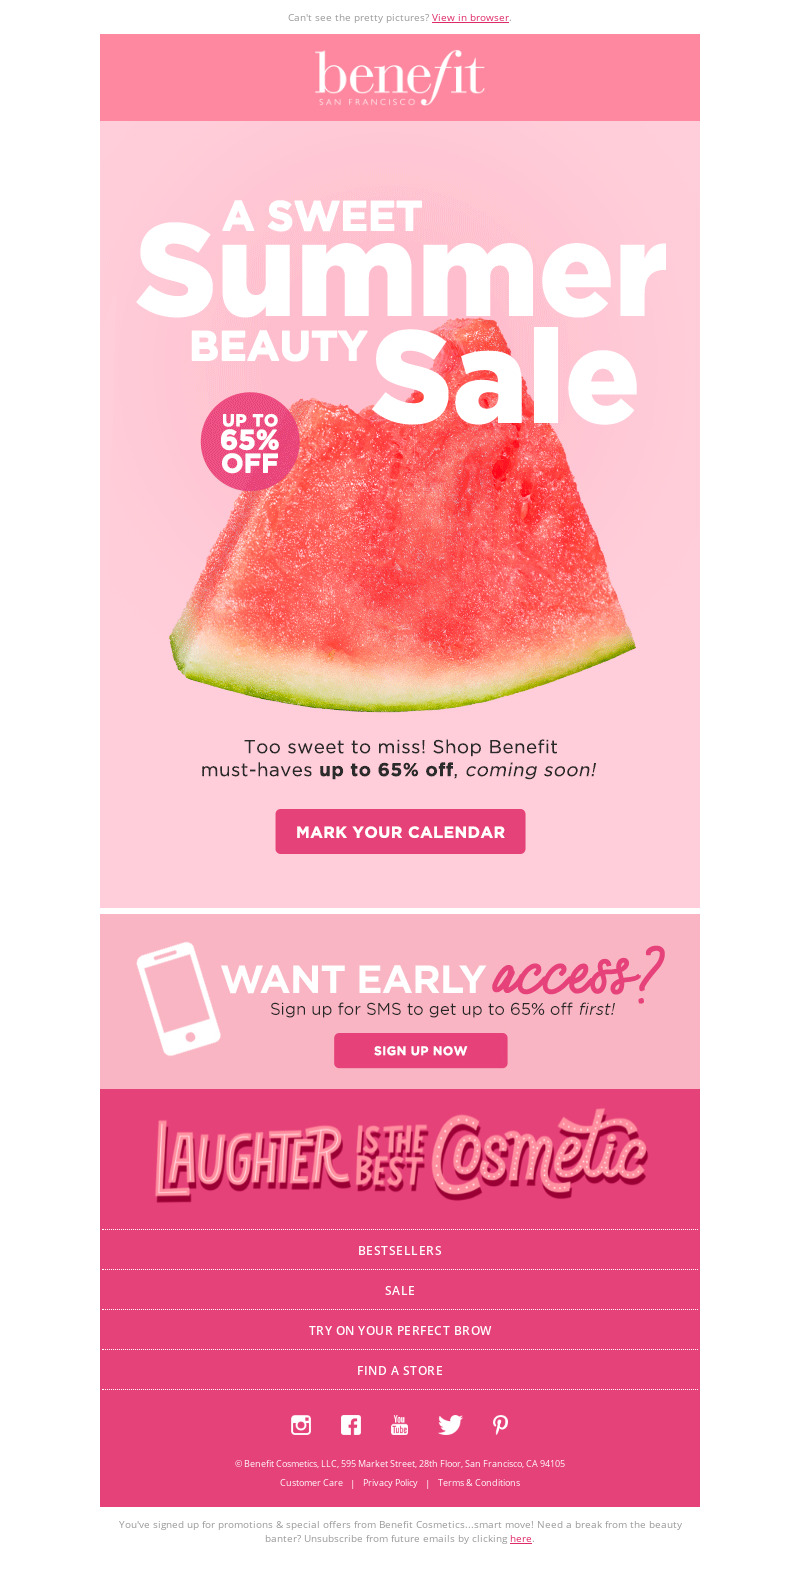 Benefit, summer beauty sale promotional email.